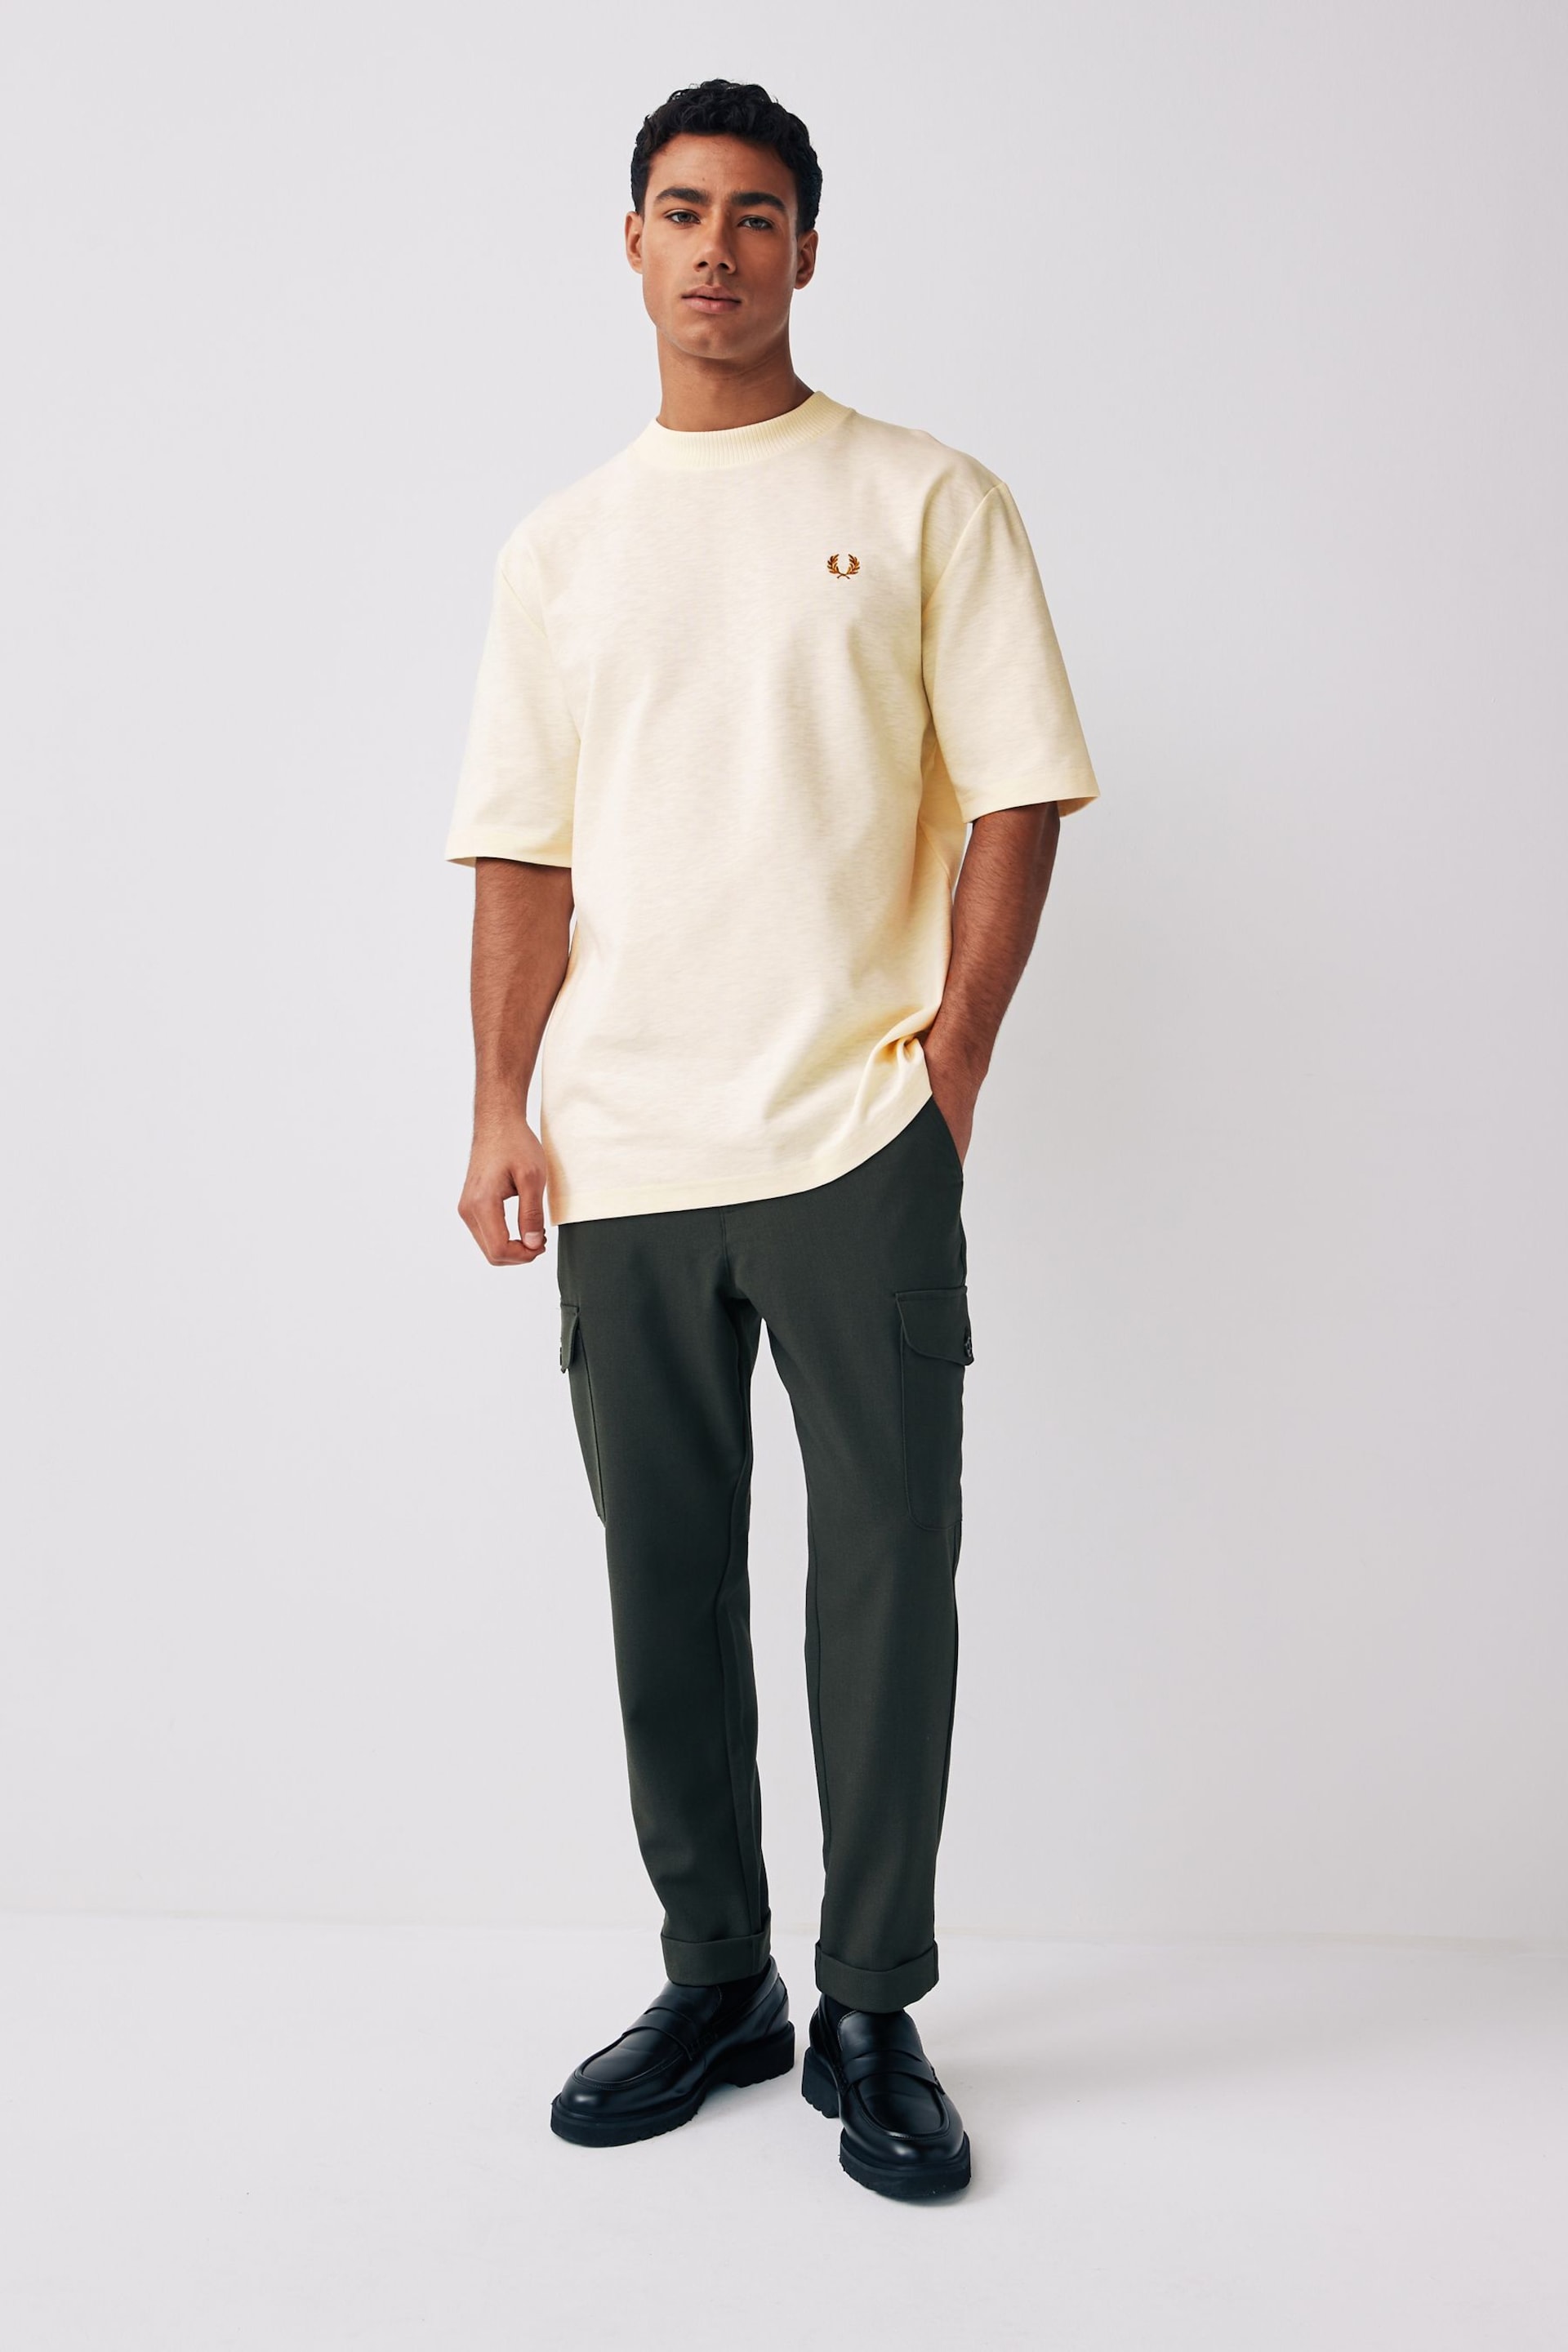 Fred Perry Relaxed Fit Slub Textured T-Shirt - Image 2 of 4